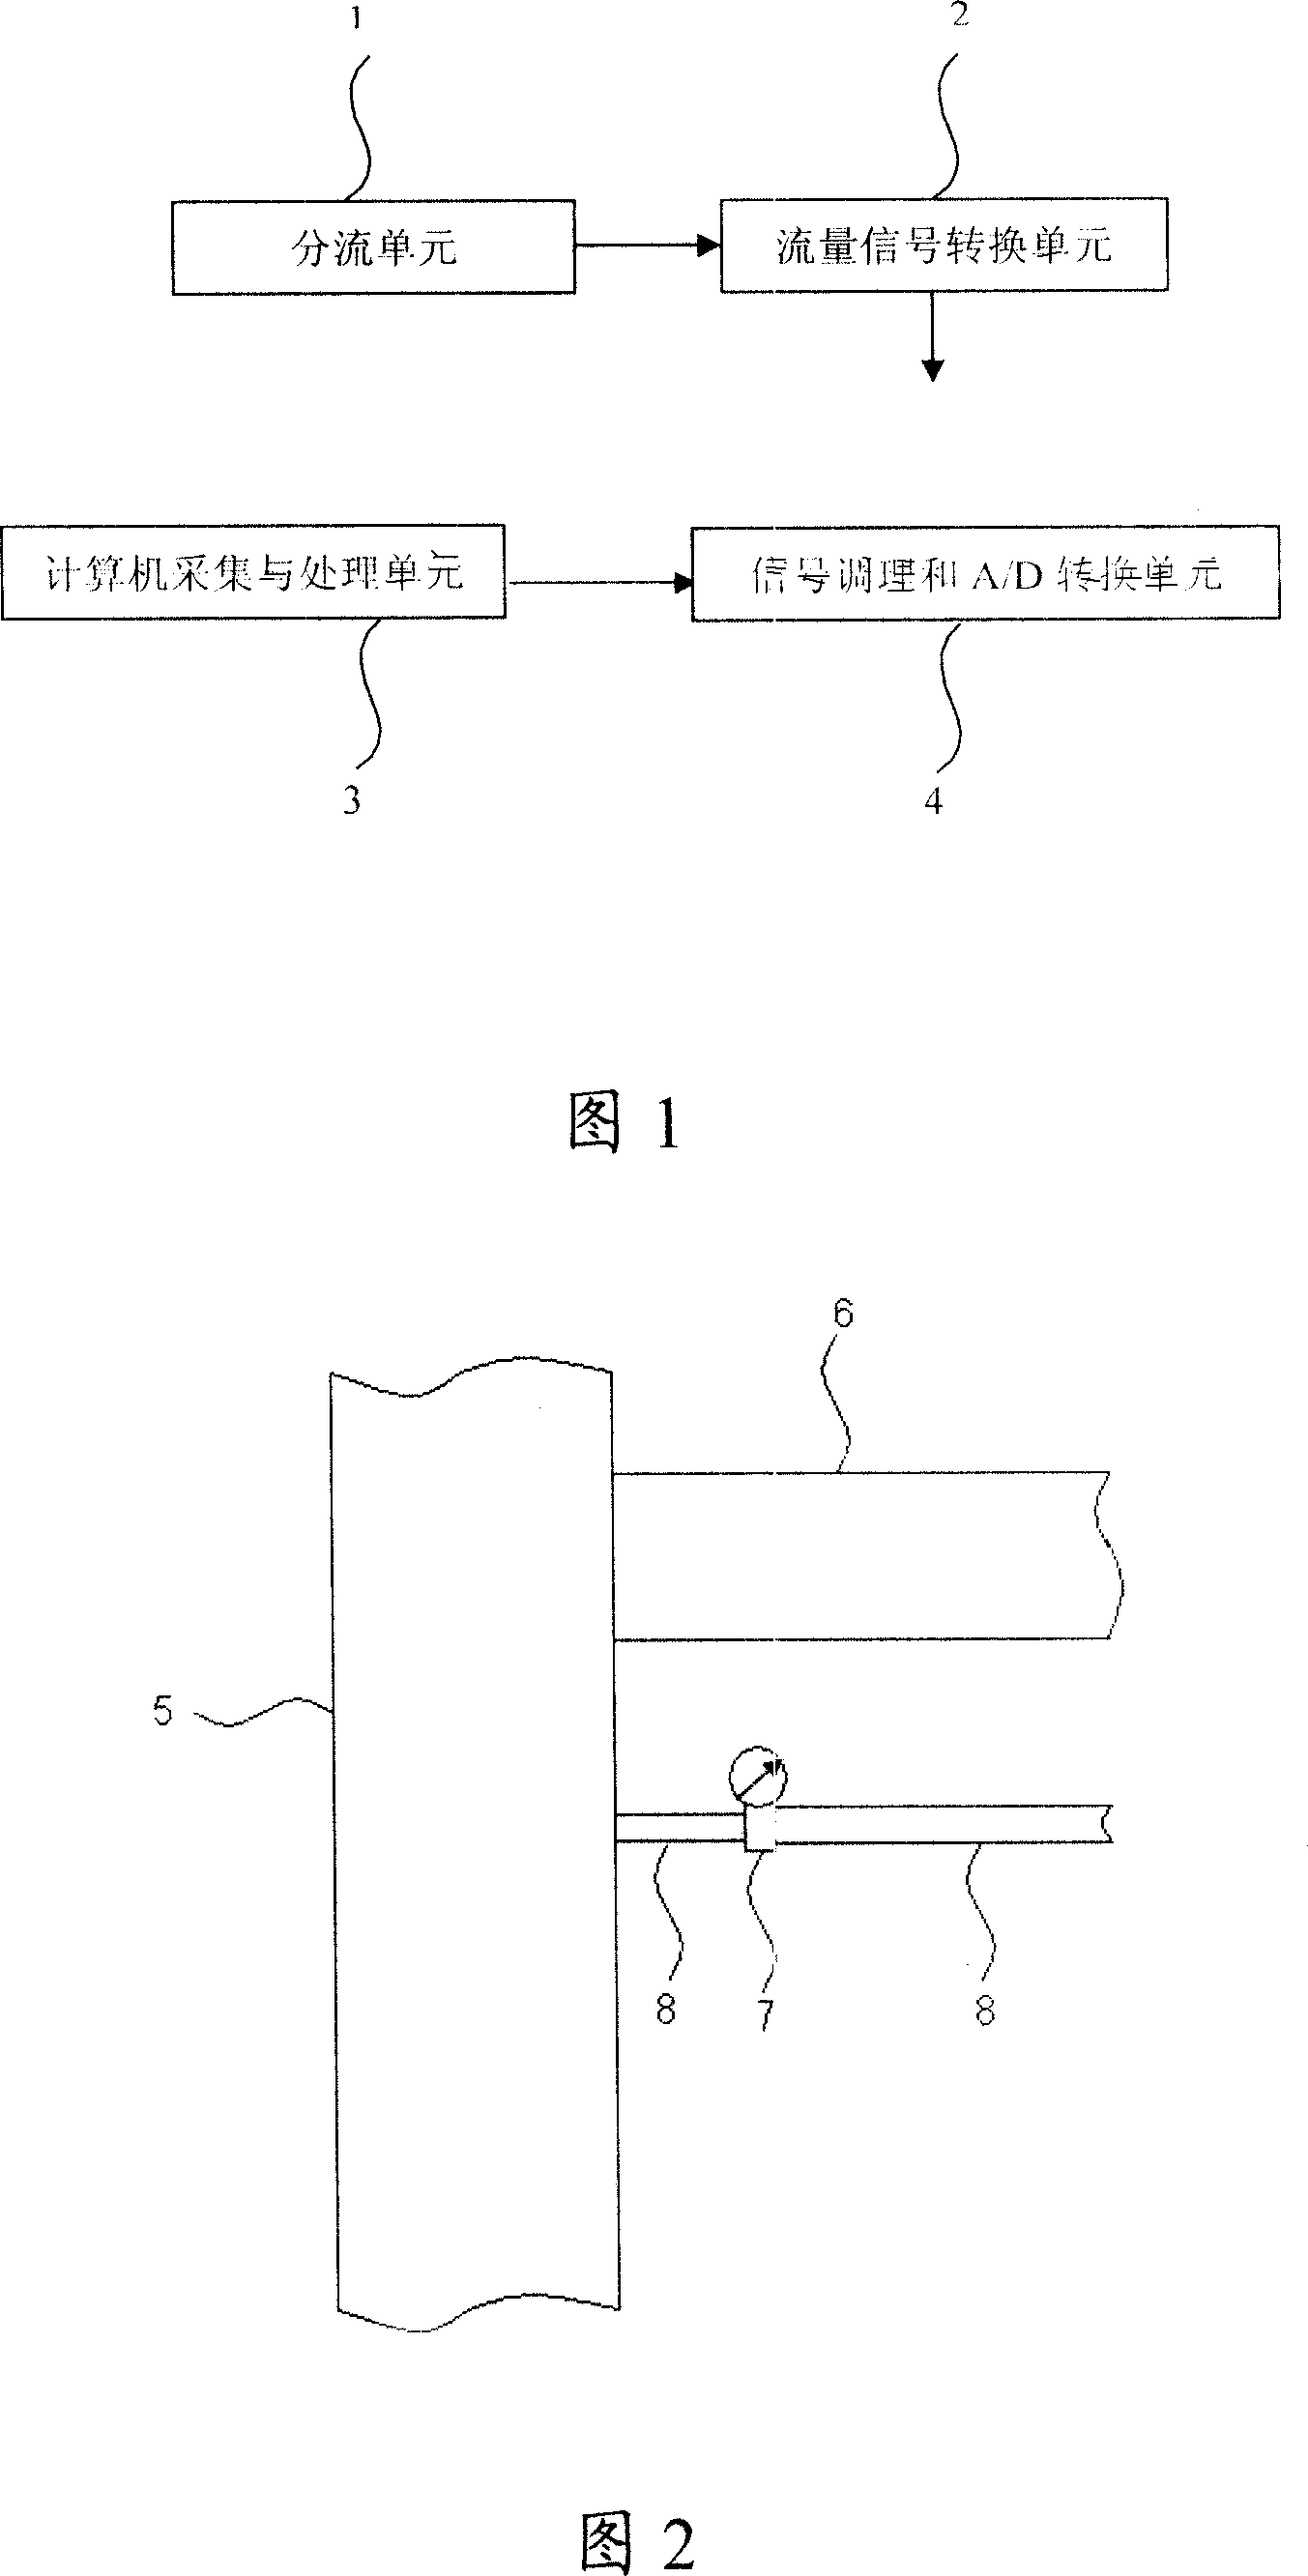 Method for measuring return flow in petroleum drilling and device therefor